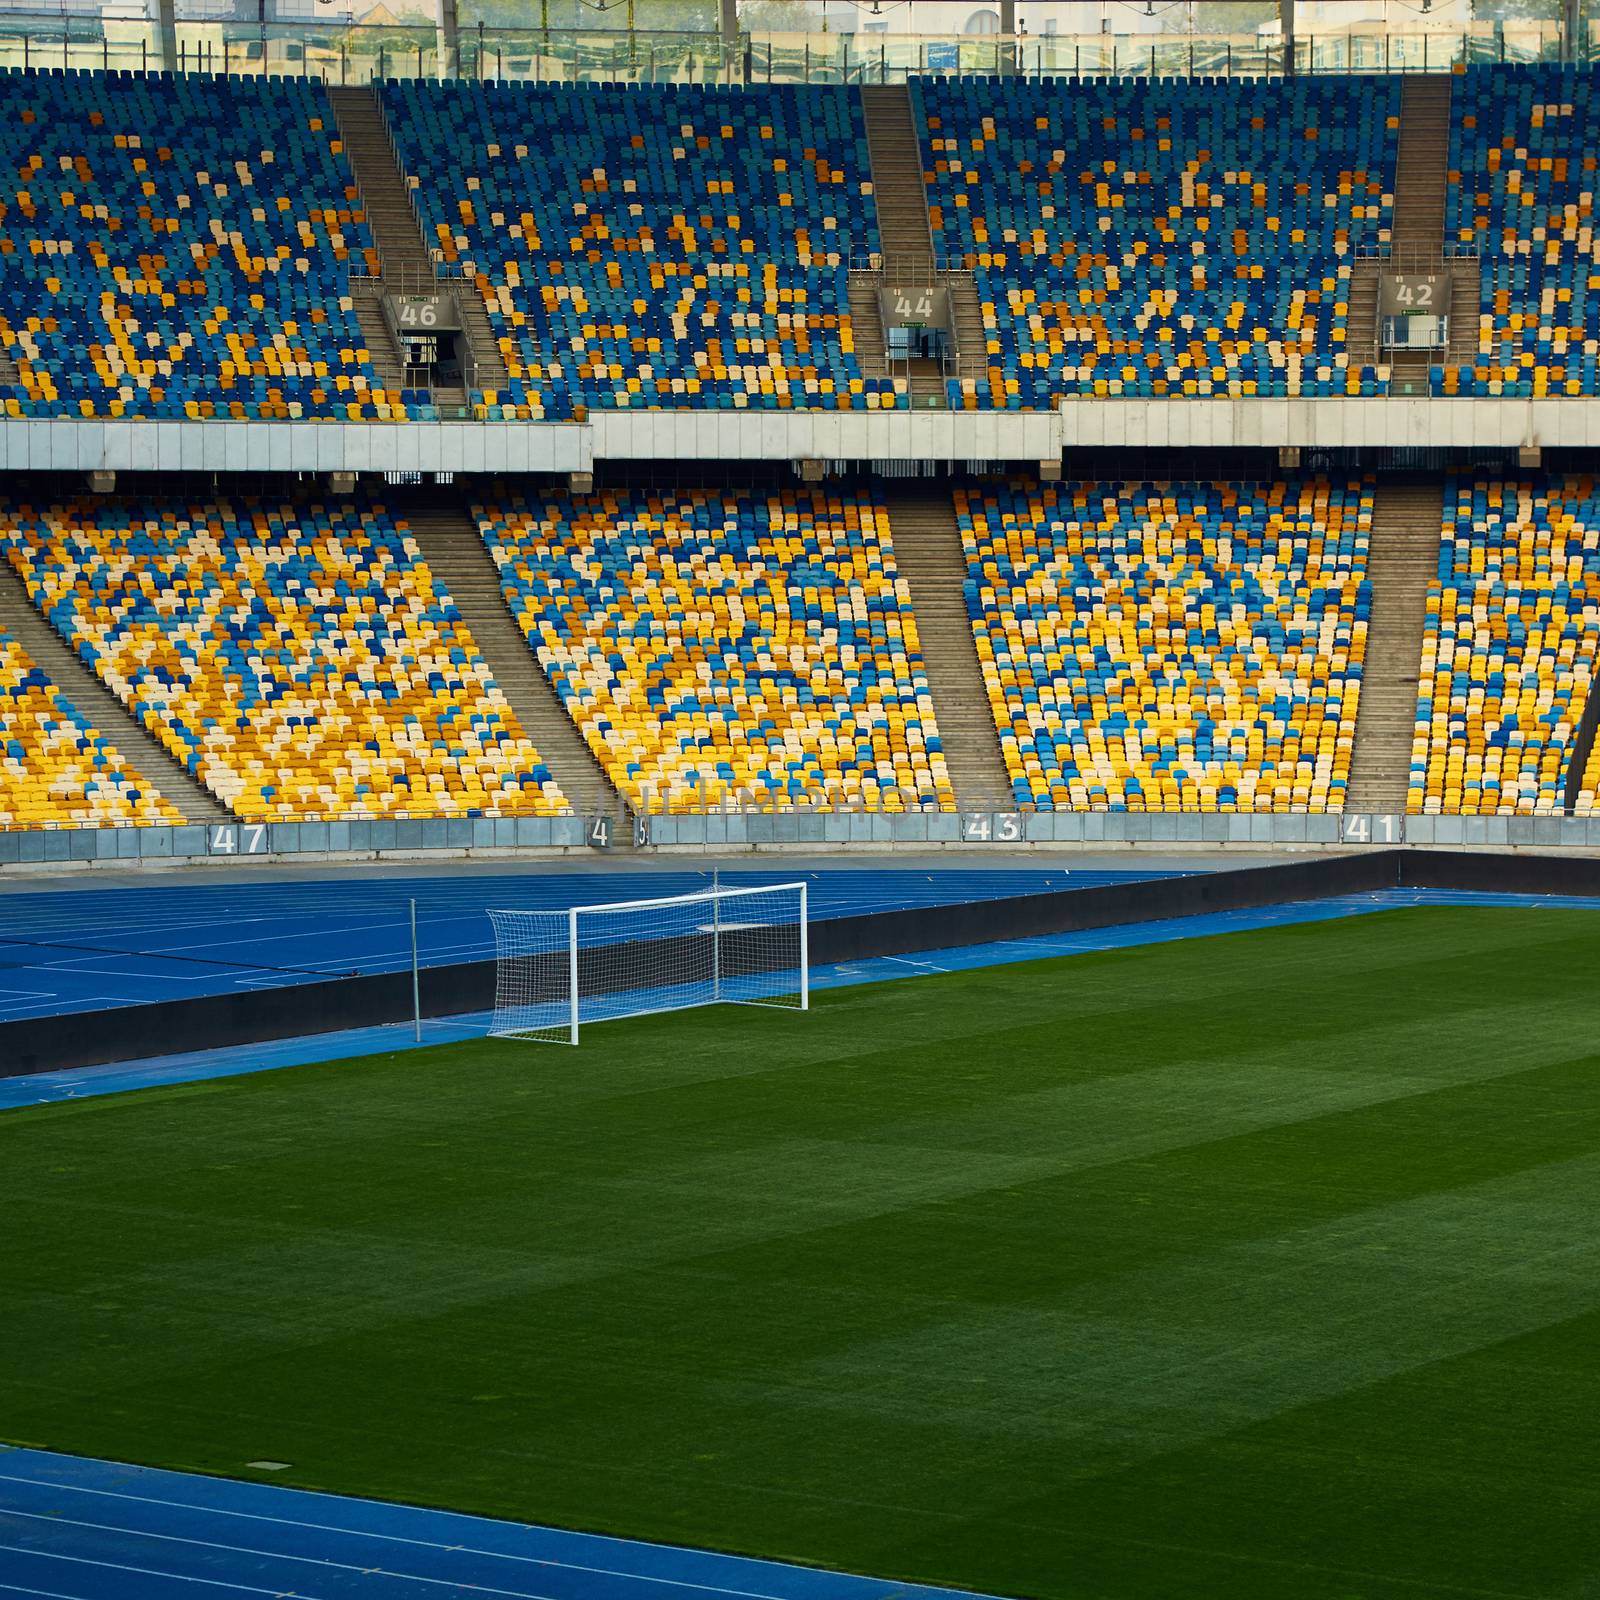 Huge Empty Football Arena, seats are painted a yellow and a blue